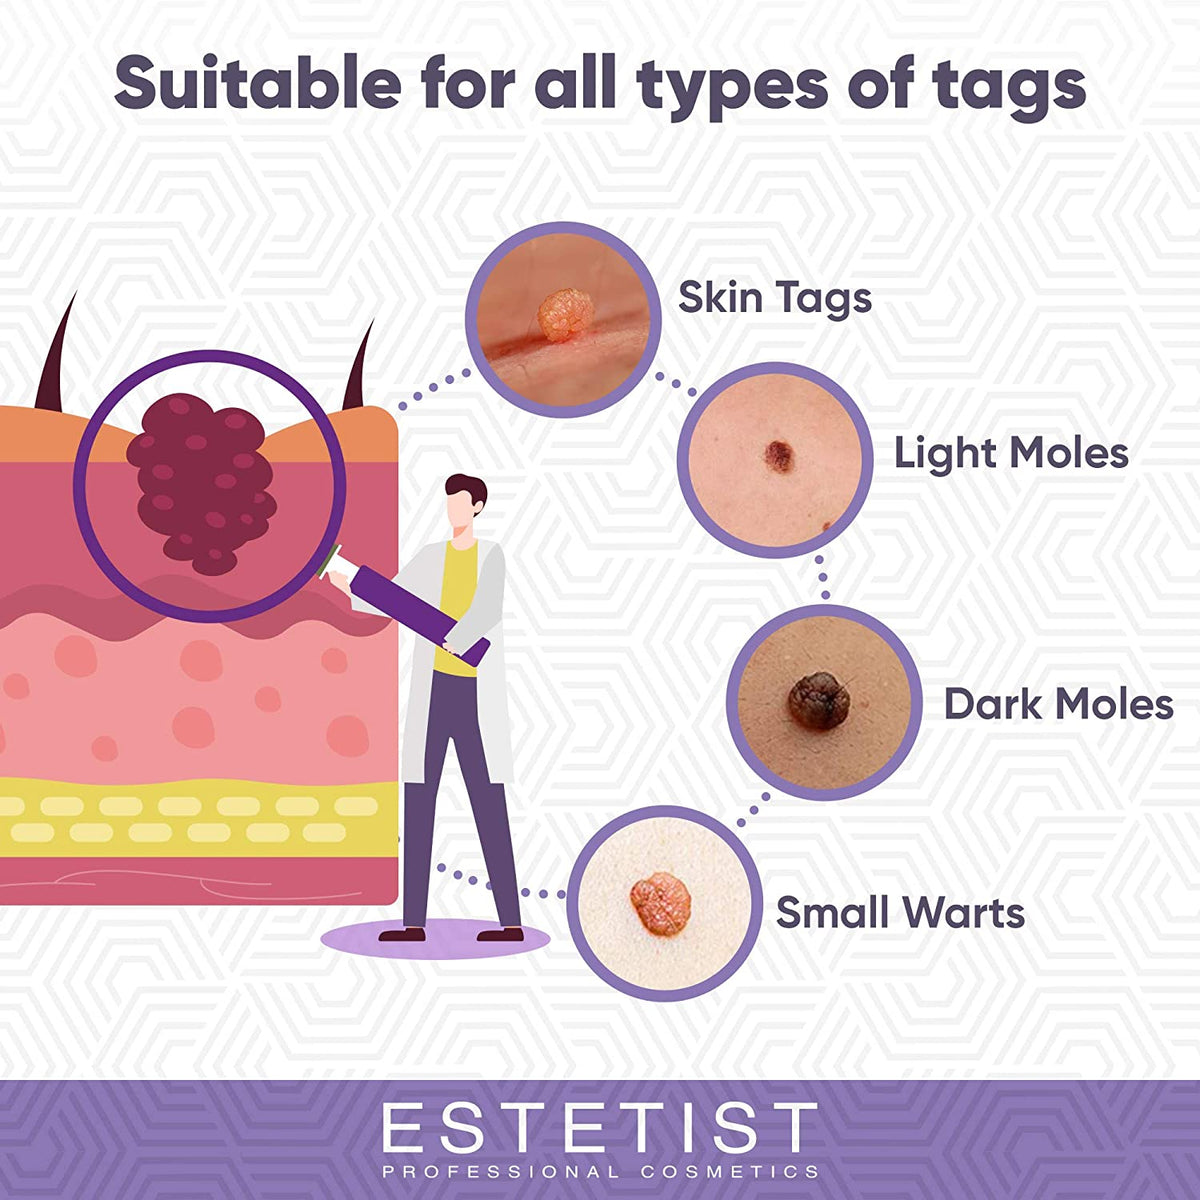 Tag Removal Patches - Wart and Acne Remover freeshipping - ESTETIST LLC